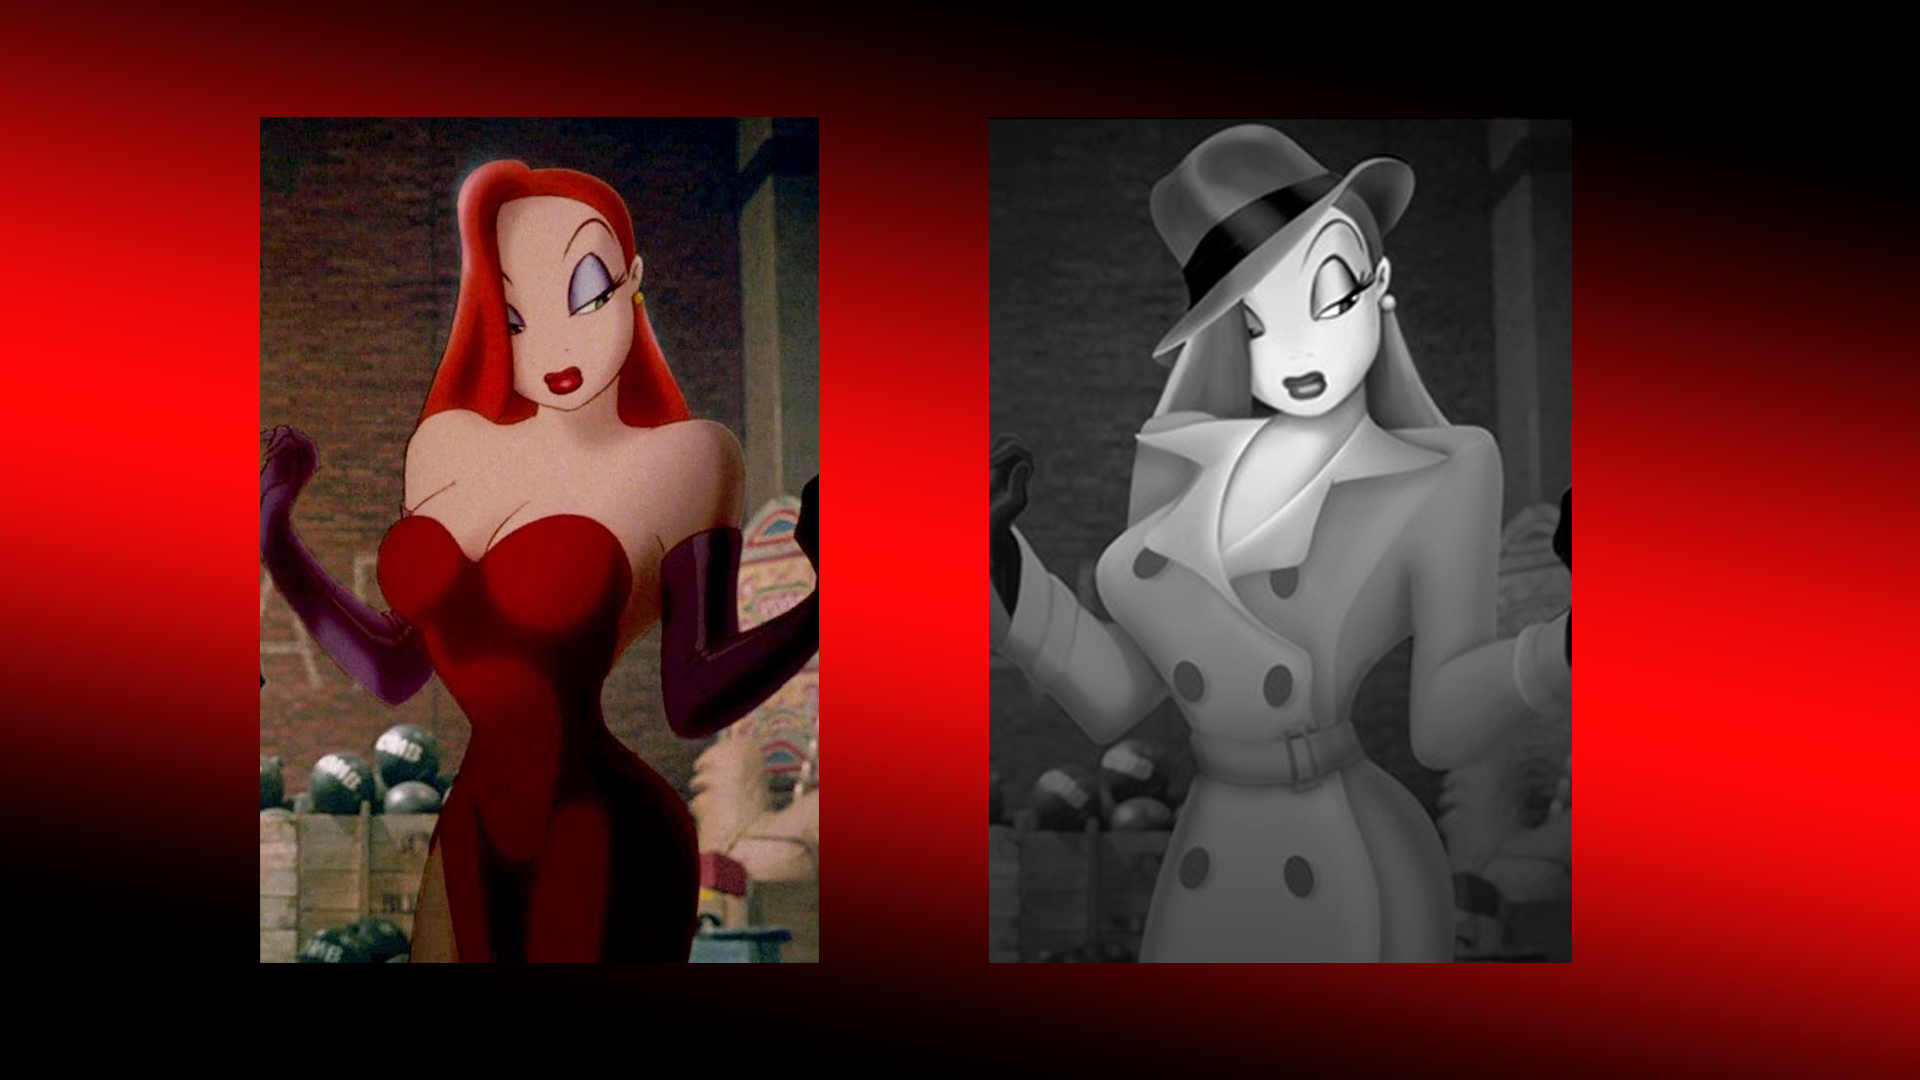 amber burkepile recommends jessica rabbit sexy game pic